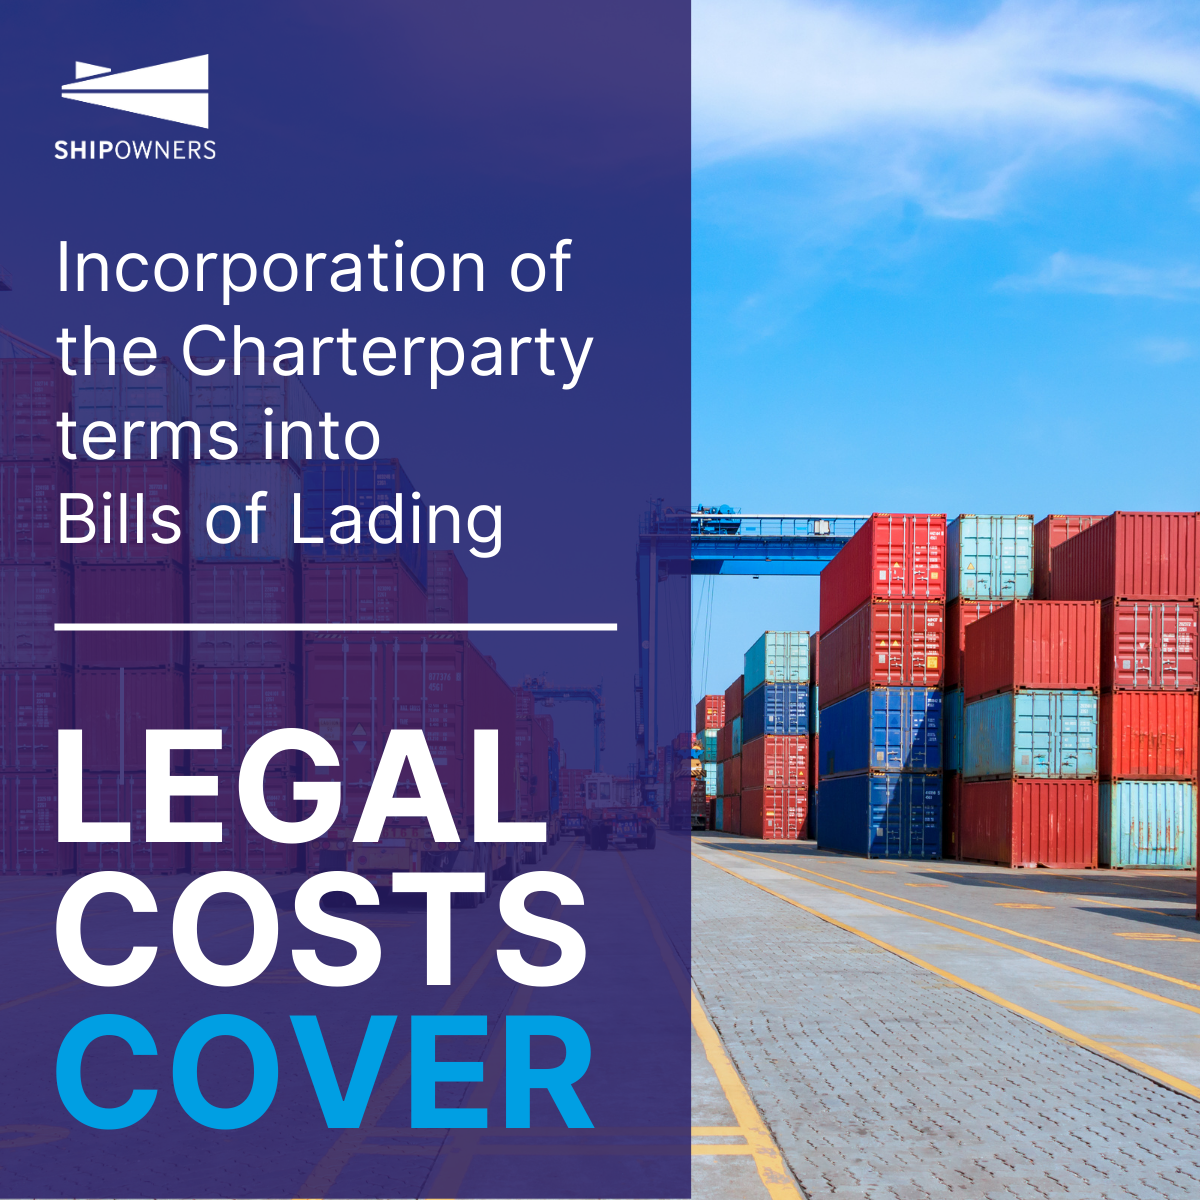 LEGAL COSTS COVER Bills of lading (2).png